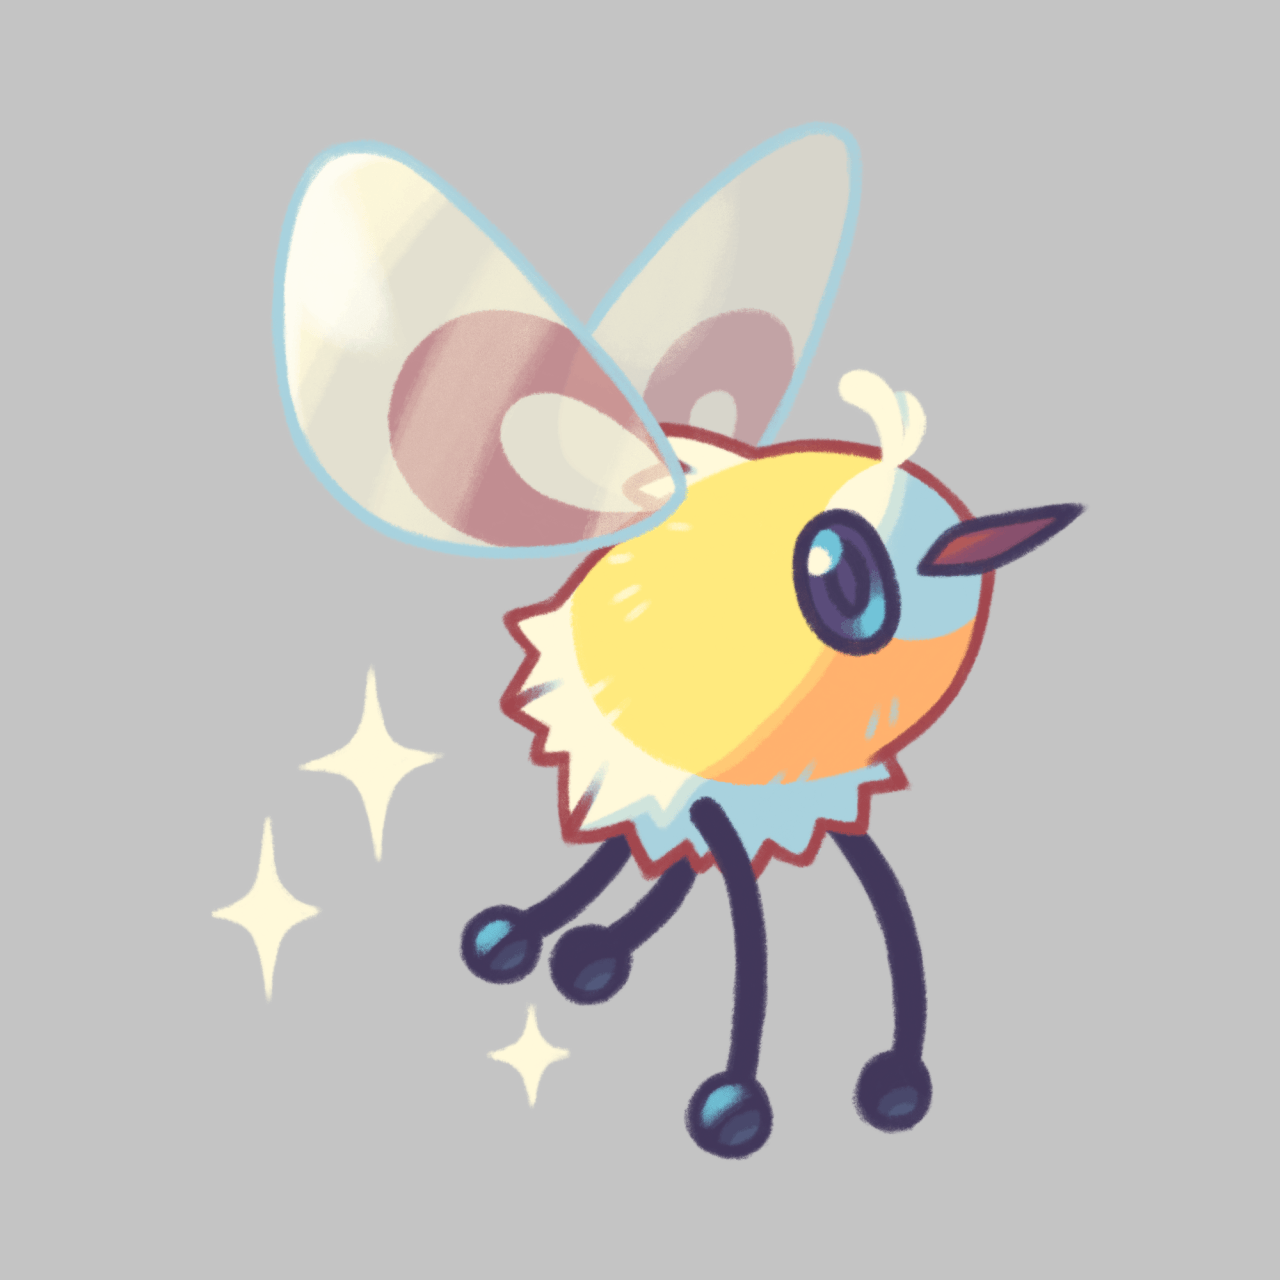 Cutiefly ” My new favorite Pokemon ;-; PROCESS VIDEO FOR CUTIEFLY